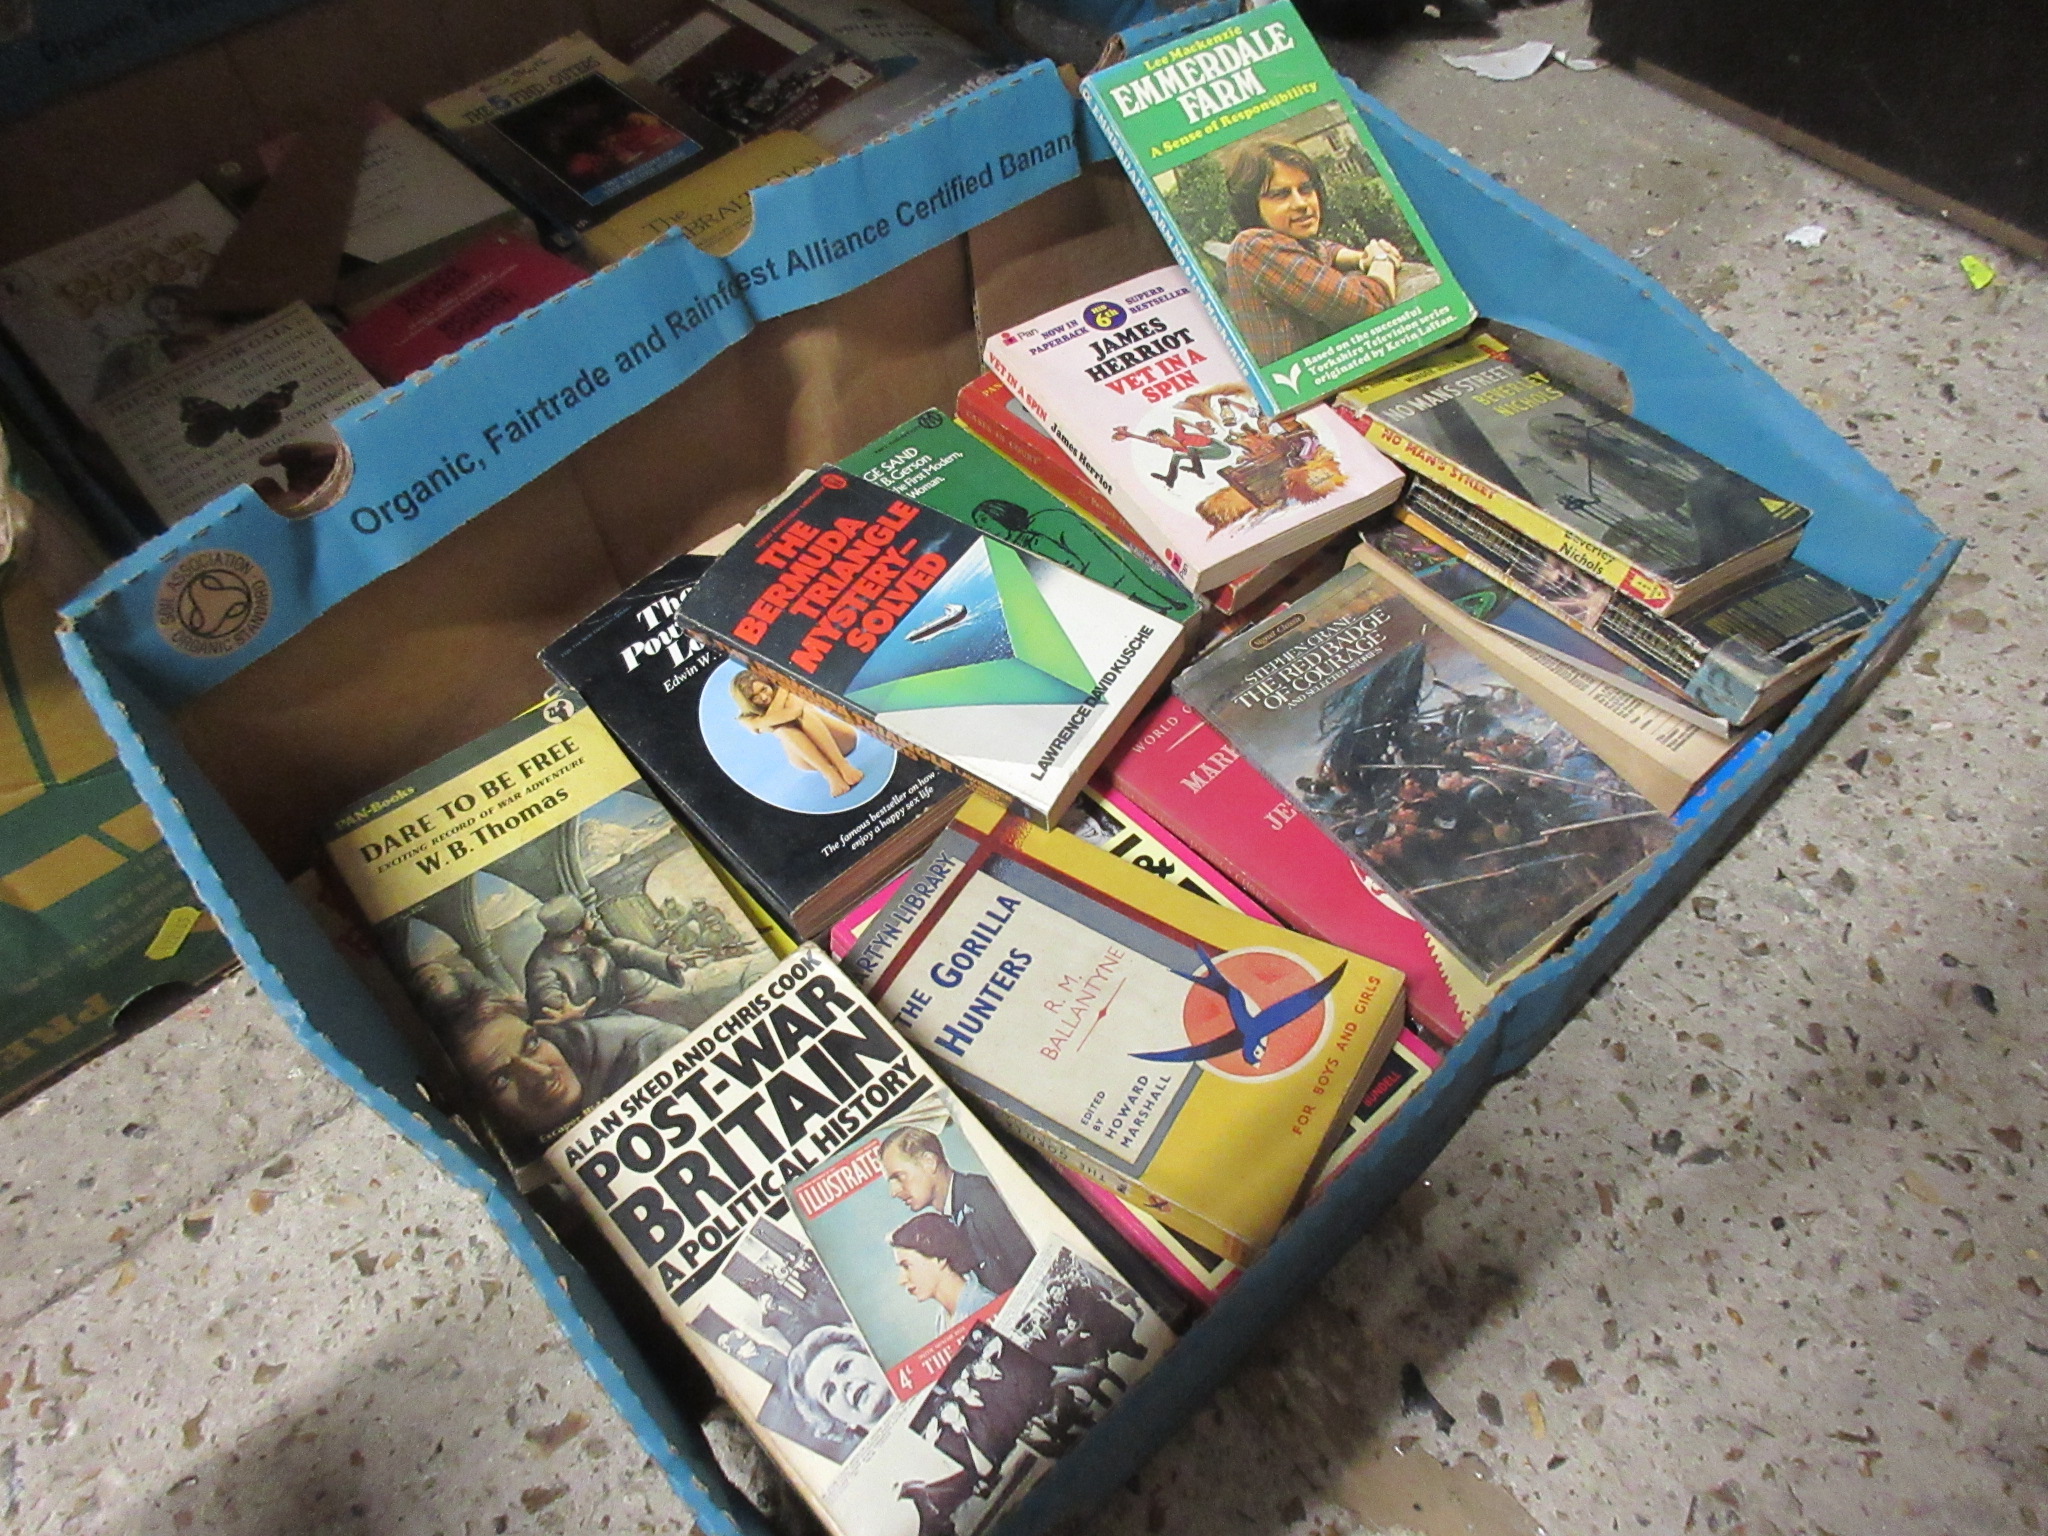 Two boxes assorted vintage paperback "Lucky Dip" including Penguin Classics, "Pan" titles, authors